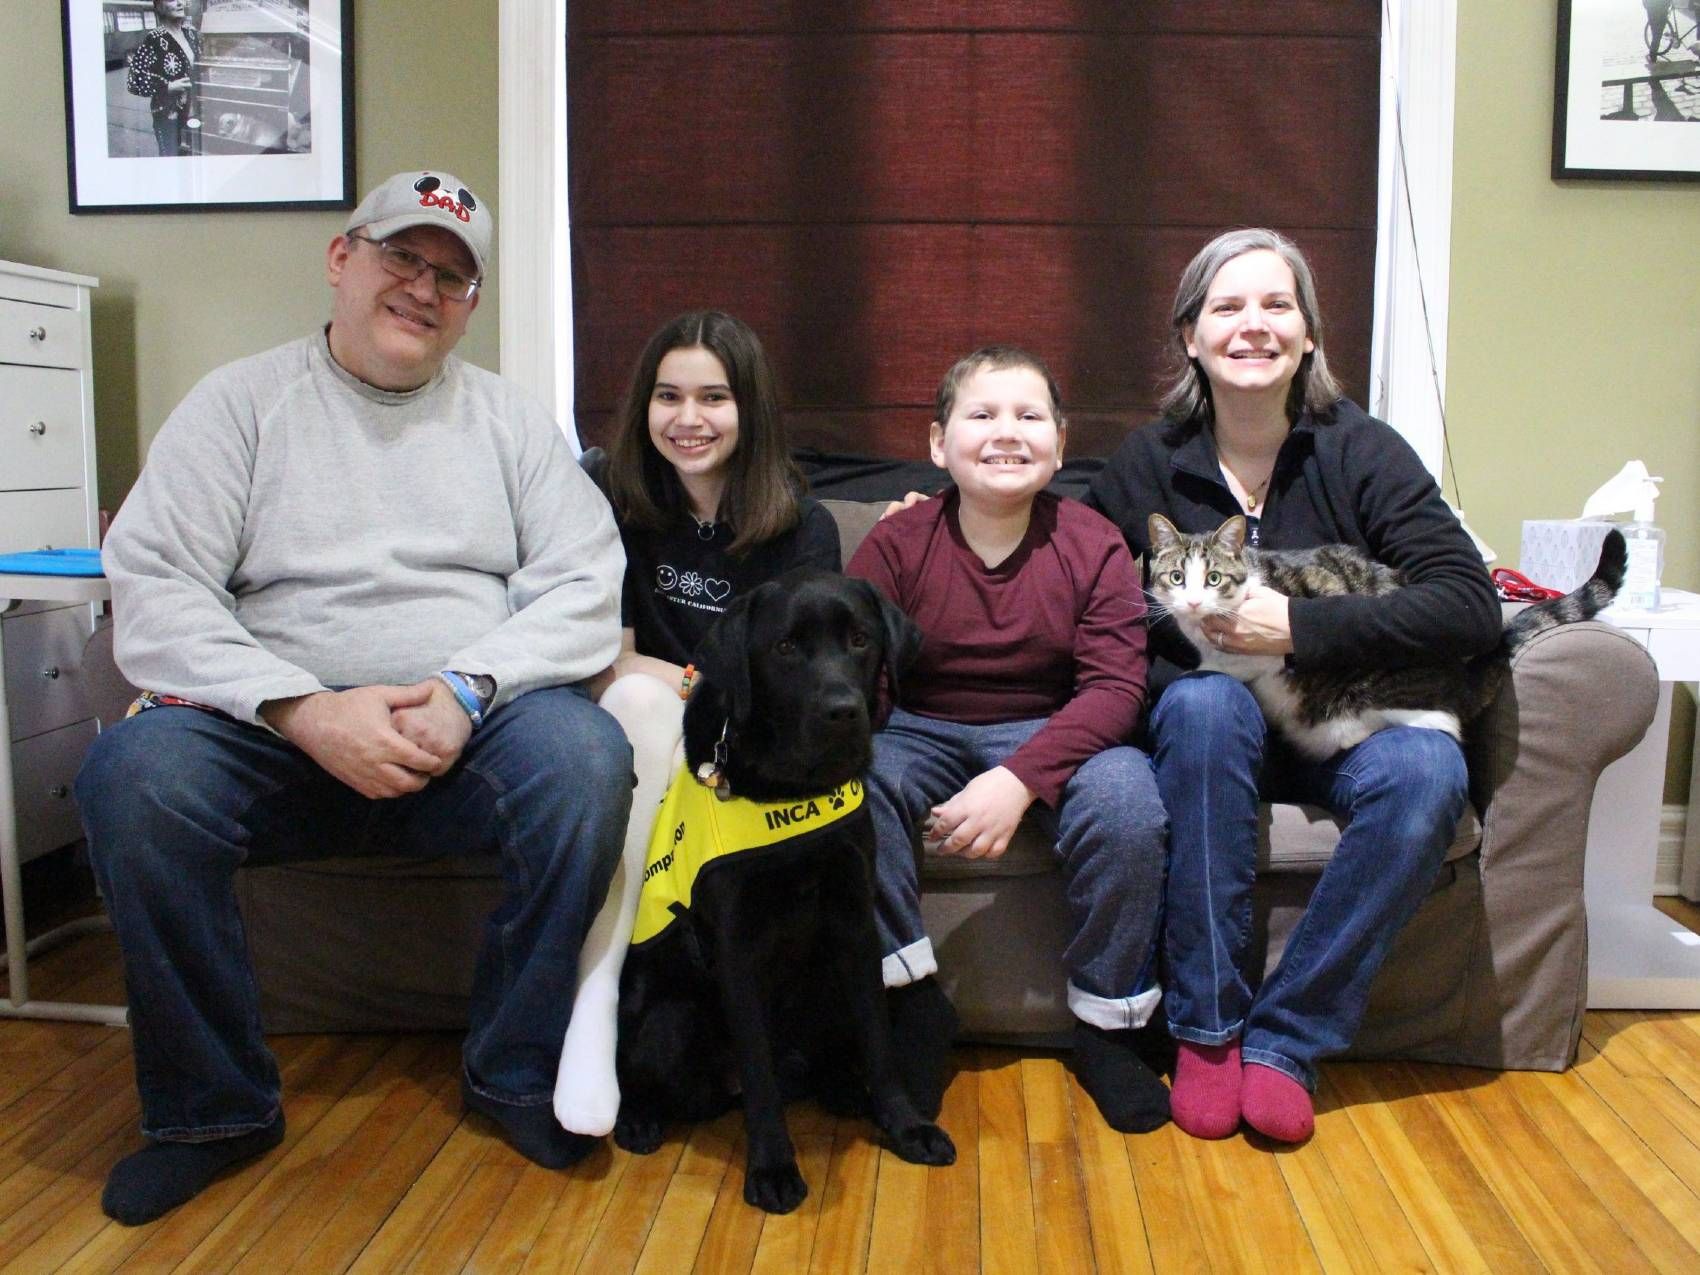 The Acosta-Pickering  family. From Left-right: Mario, Abby, Oliver, Dawn, and Chewbacca their cat. Oliver's dog, Hope, sits in front.